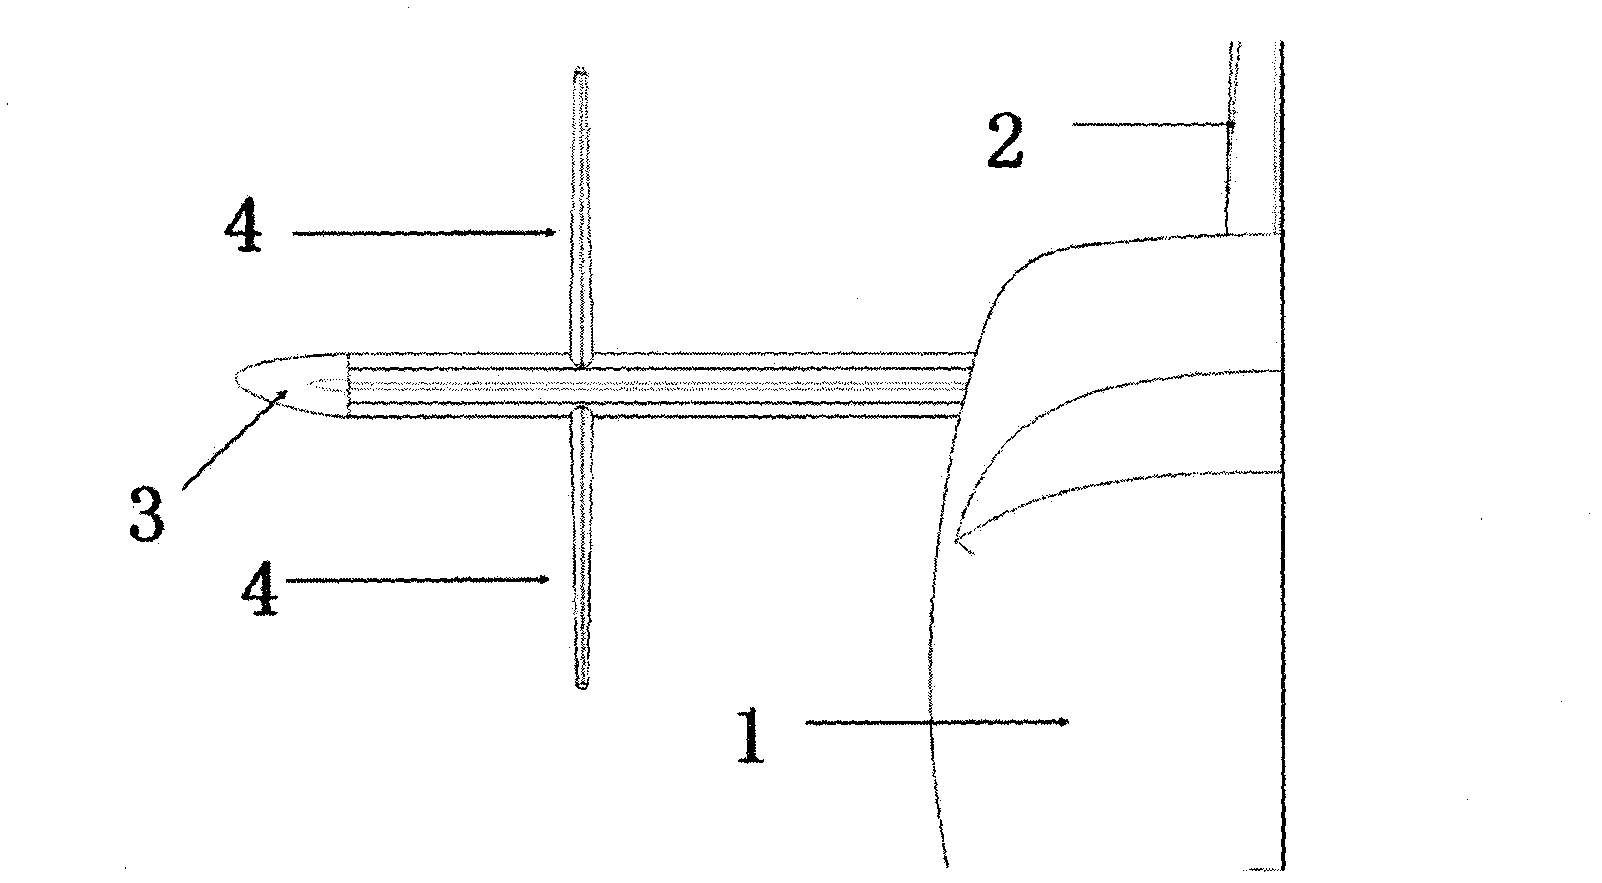 Winglet for increasing pneumatic efficiency of horizontal tail of time-domain airplane